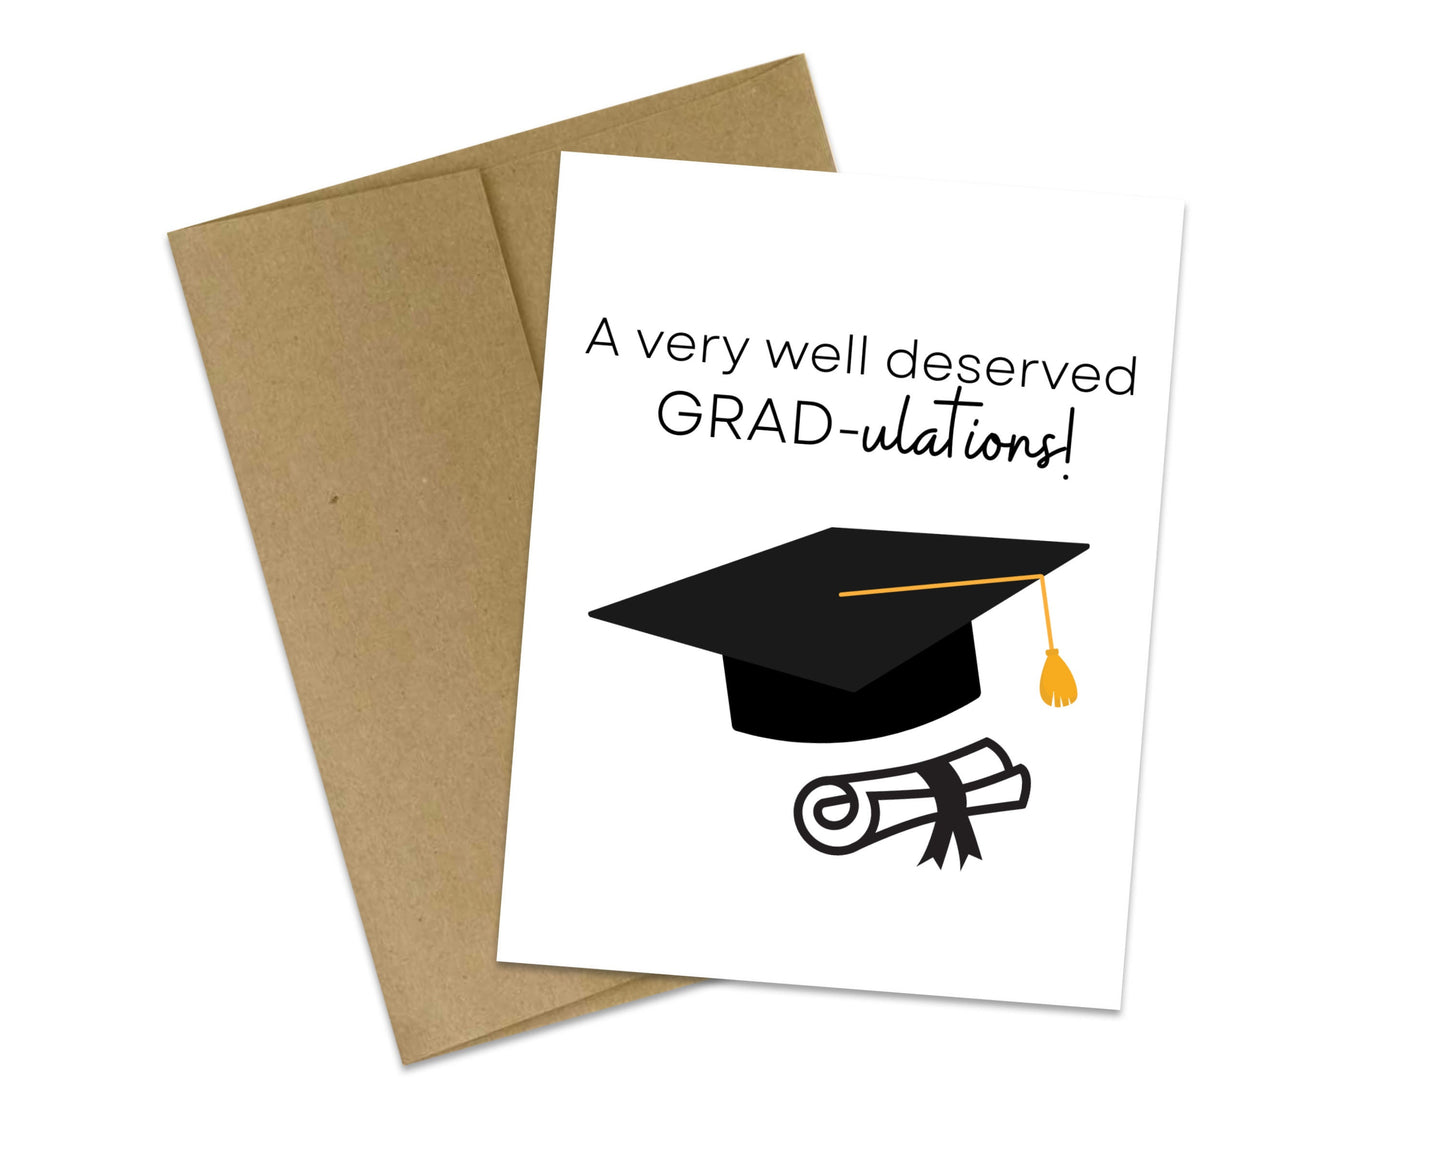 A very well deserved GRAD-ulations!